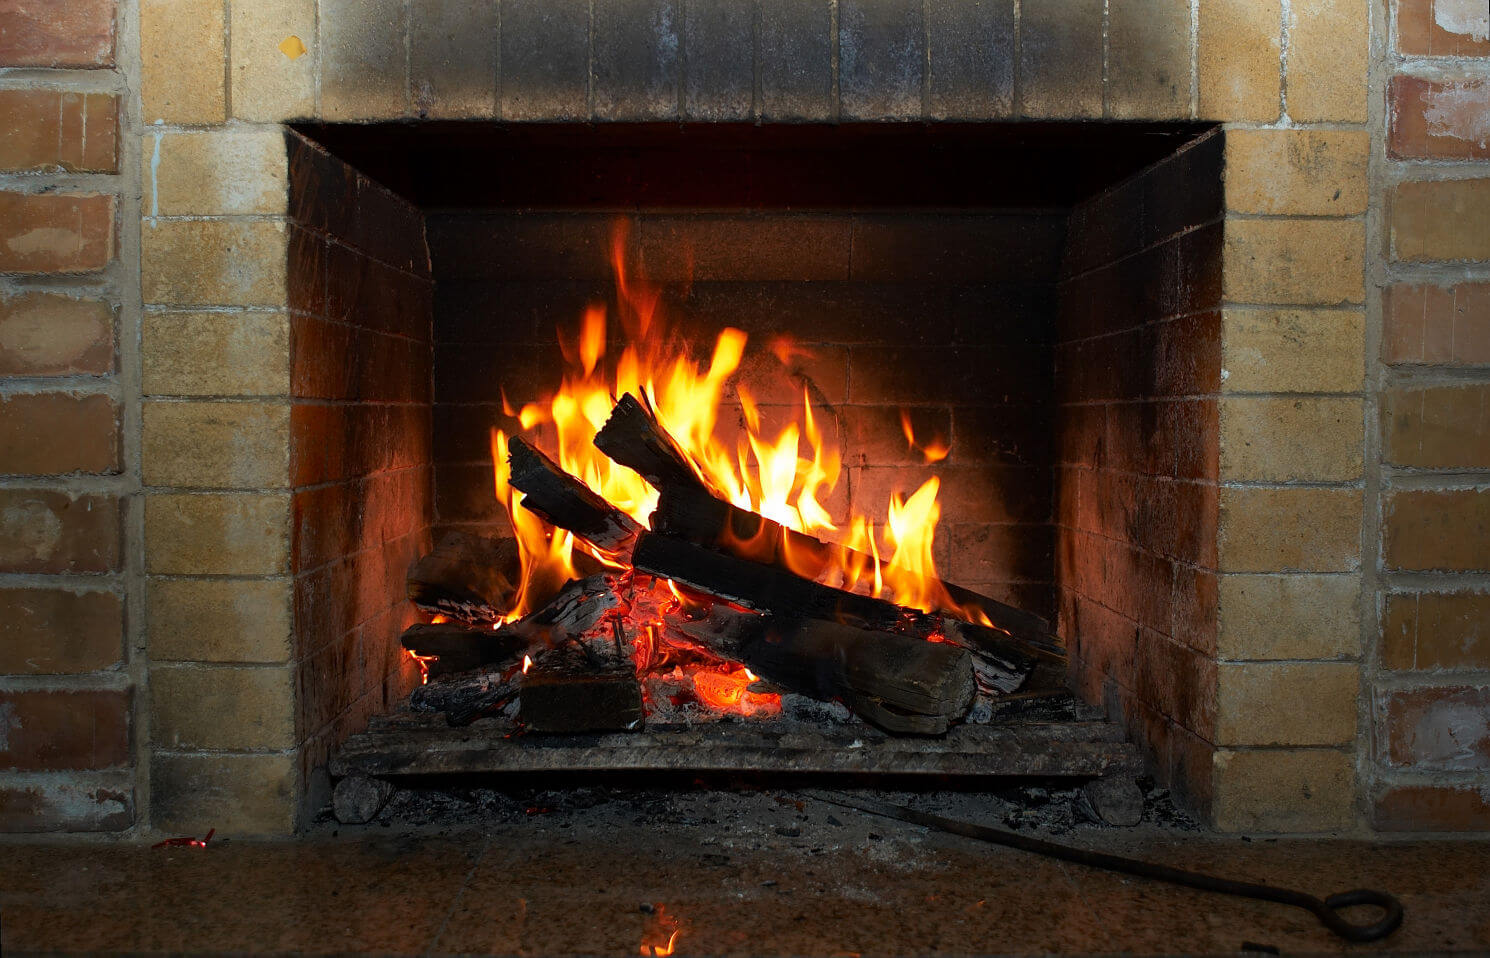 Trust us for Firebox repairs and rebuilds-Close up of wood burning in fireplace with brick surround